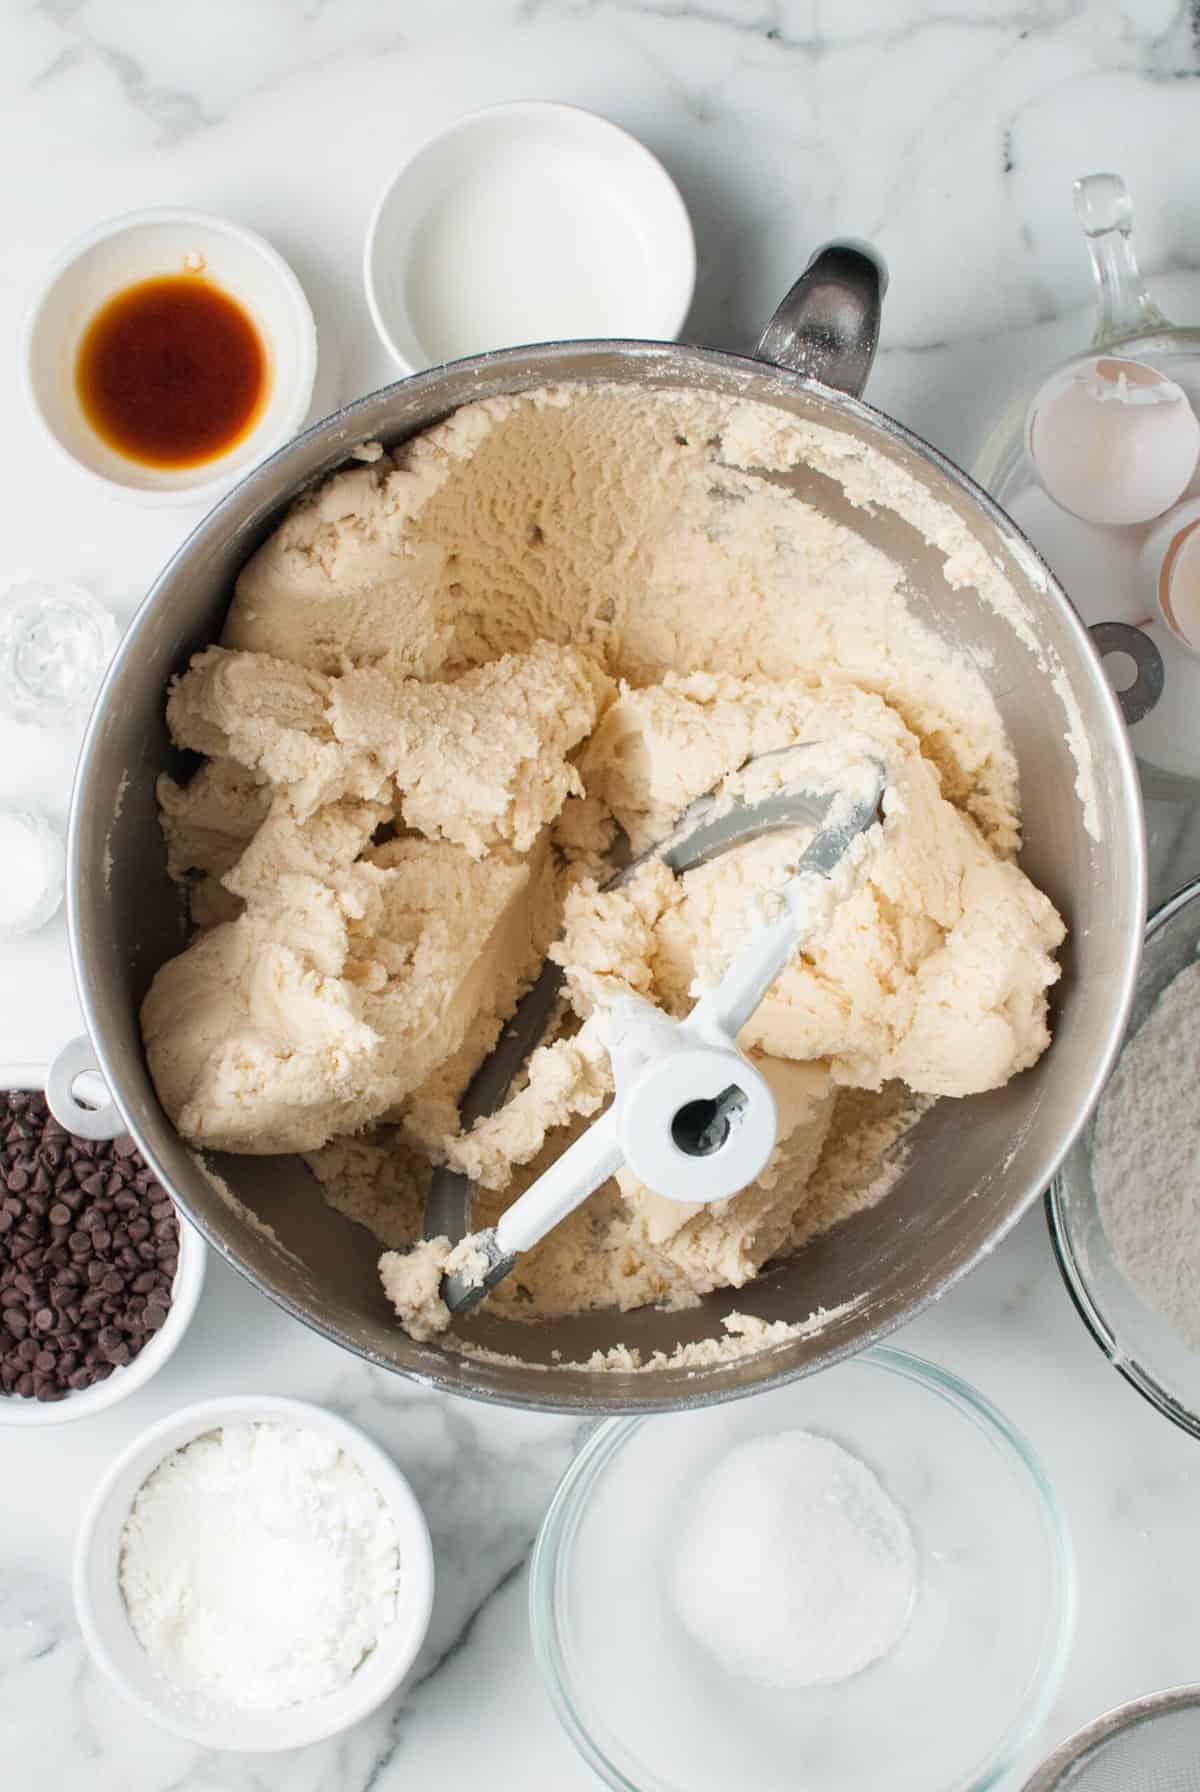 Finished cookie dough in a large mixing bowl.